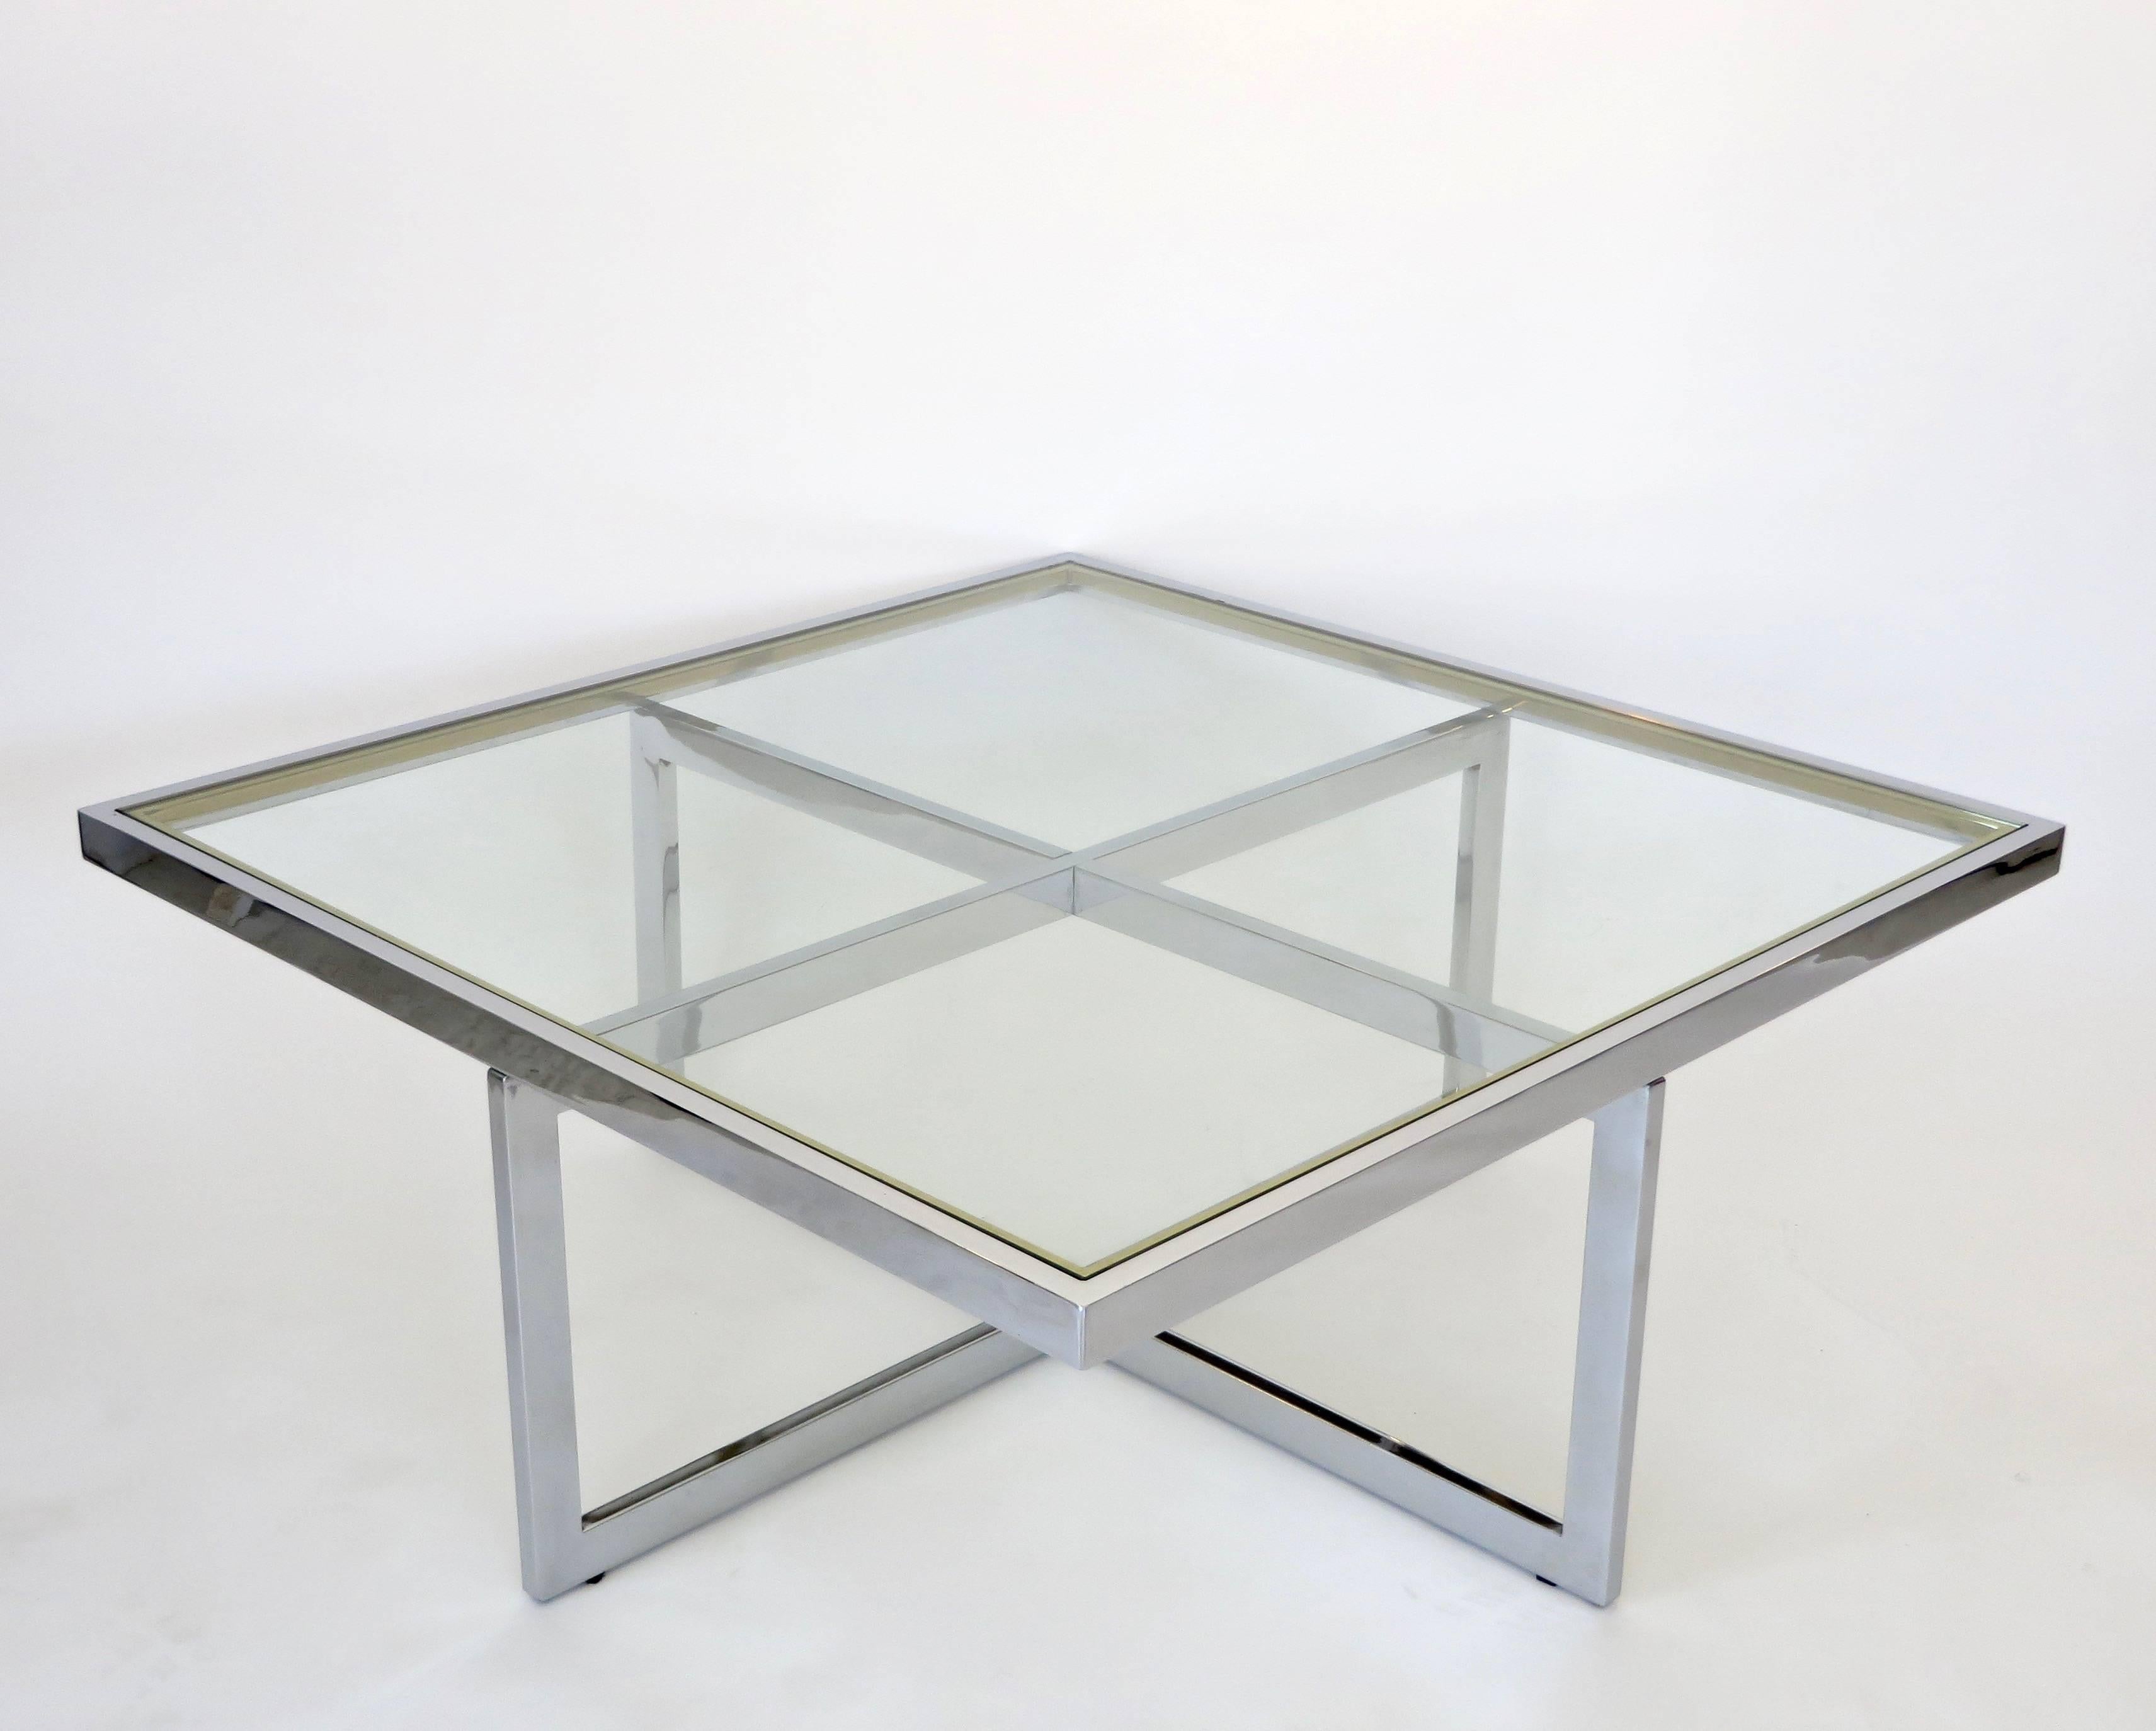 Late 20th Century French Maison Charles et Fils Square Chrome and Brass Coffee Table, circa 1970